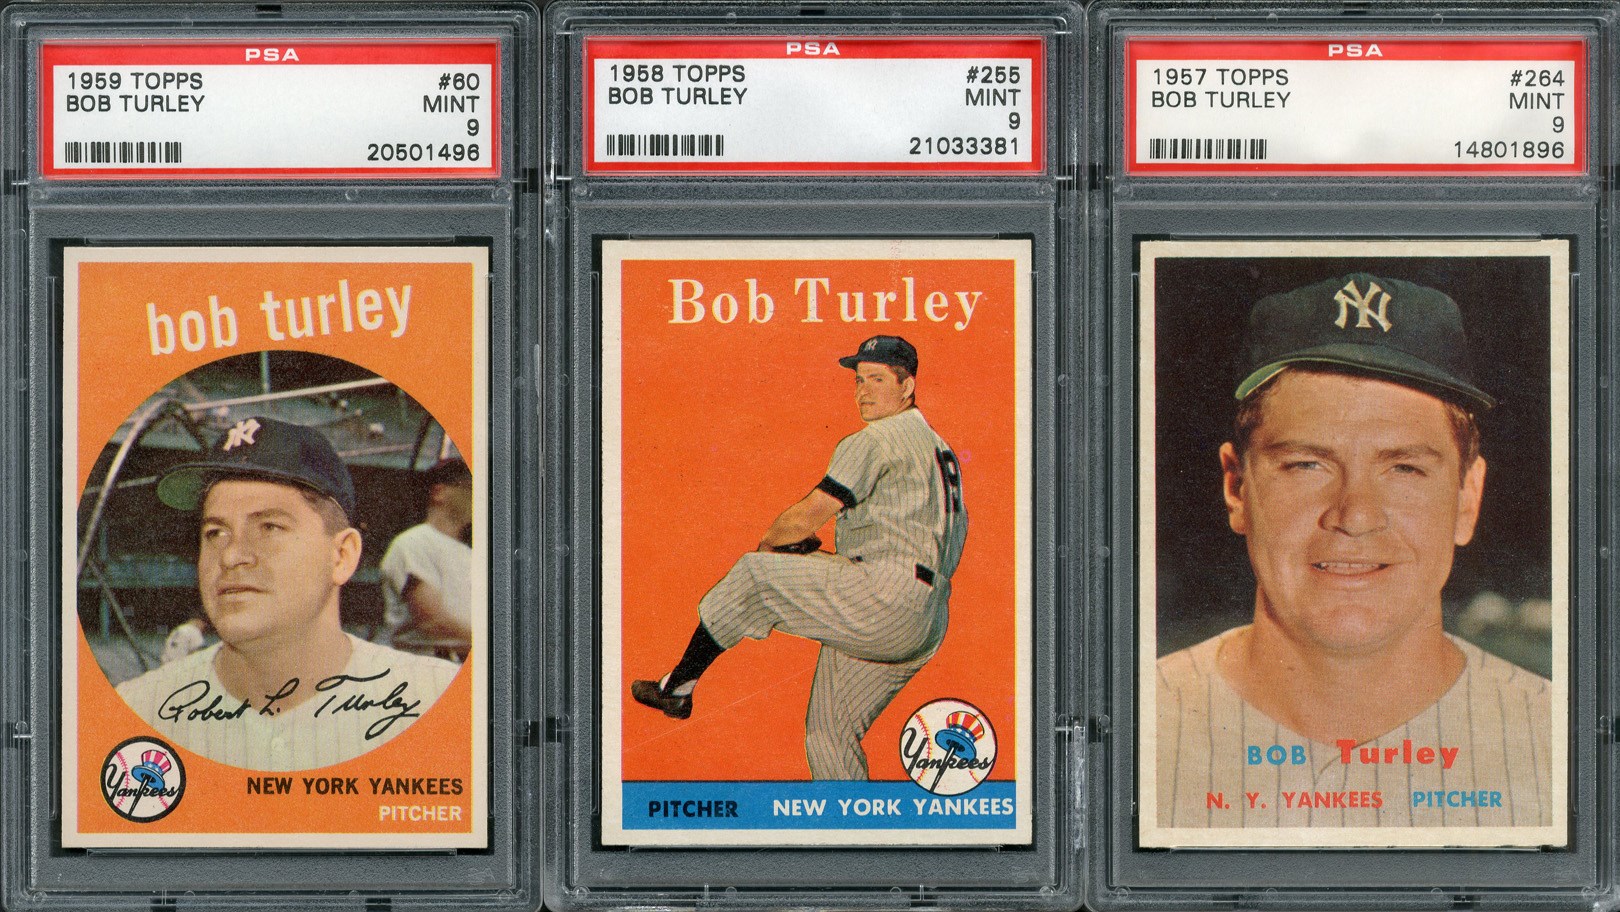 Baseball and Trading Cards - 1957, 58, 59 Topps Bob Turley (All PSA MINT 9)